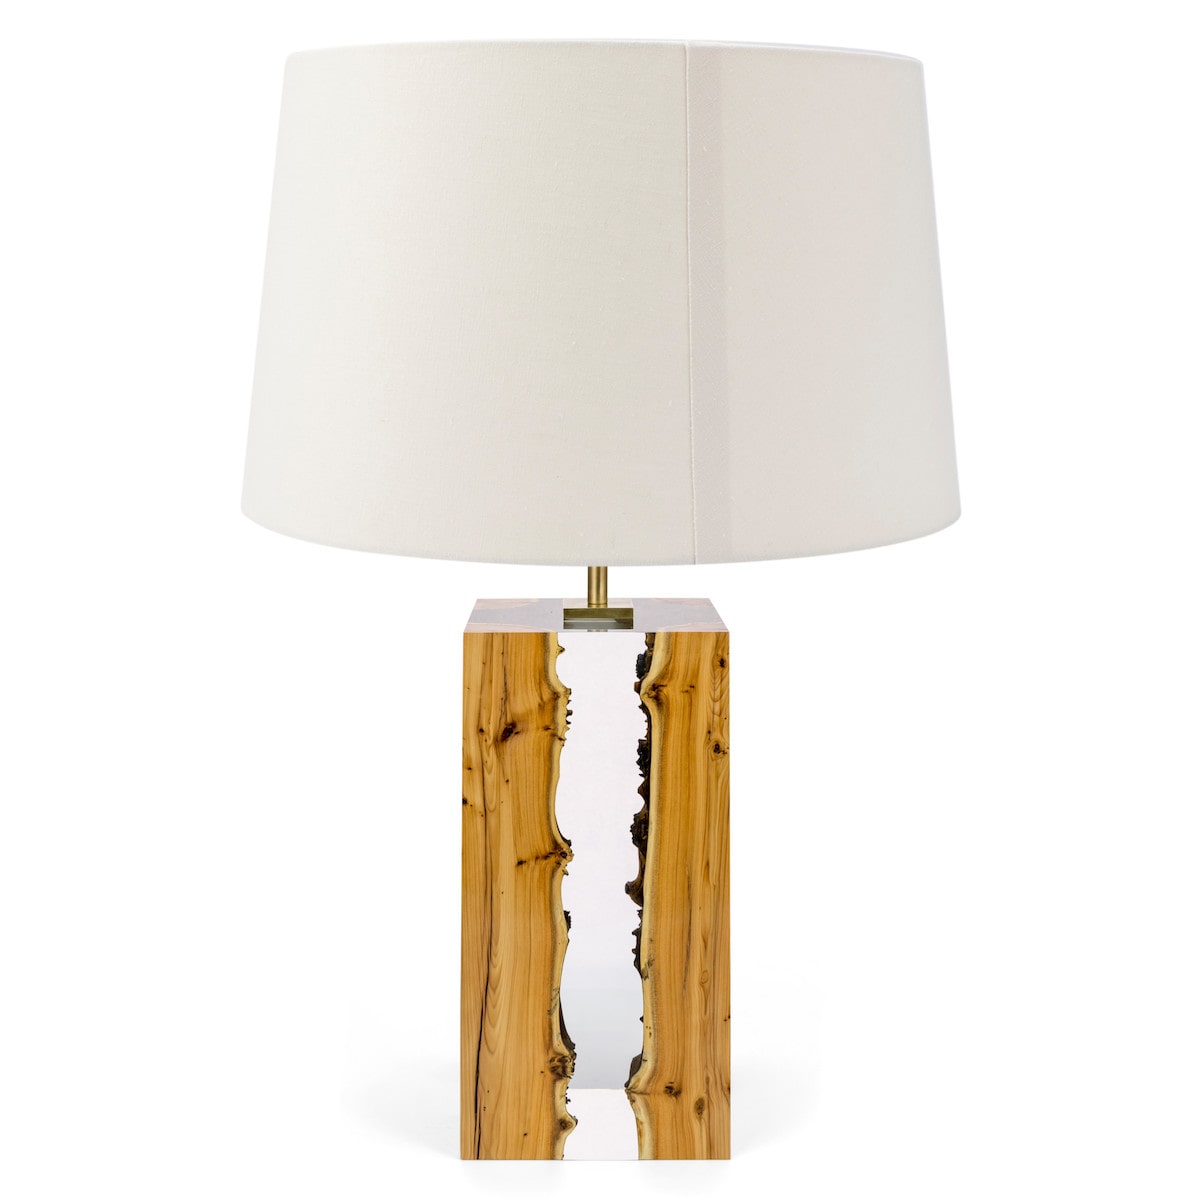 Yew and Acrylic Table Lamp by Iluka London for AUTHOR's collections of British-made luxury home decor